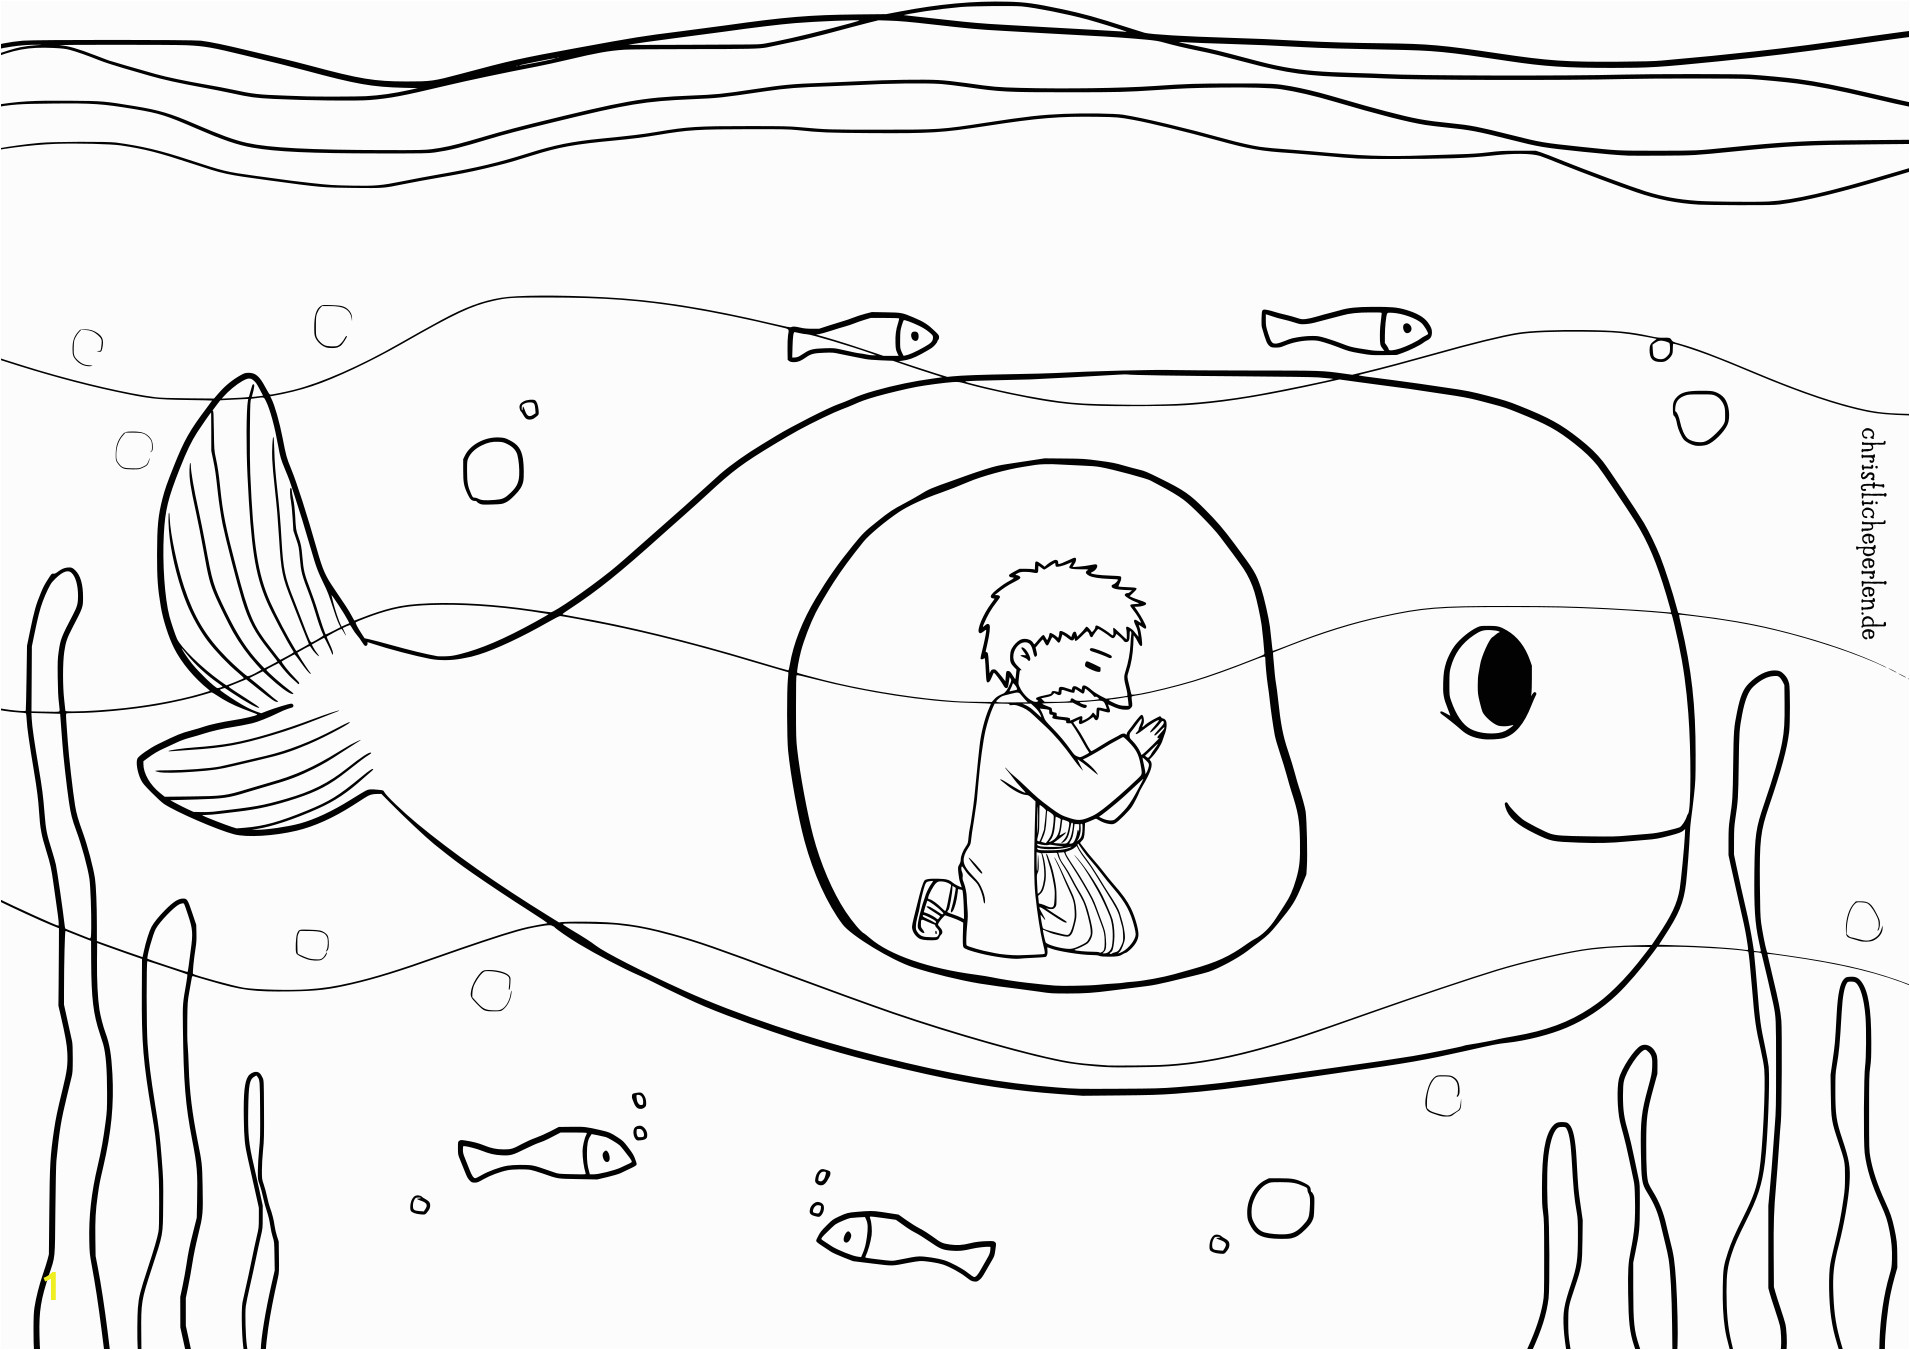 jonah and the whale coloring page